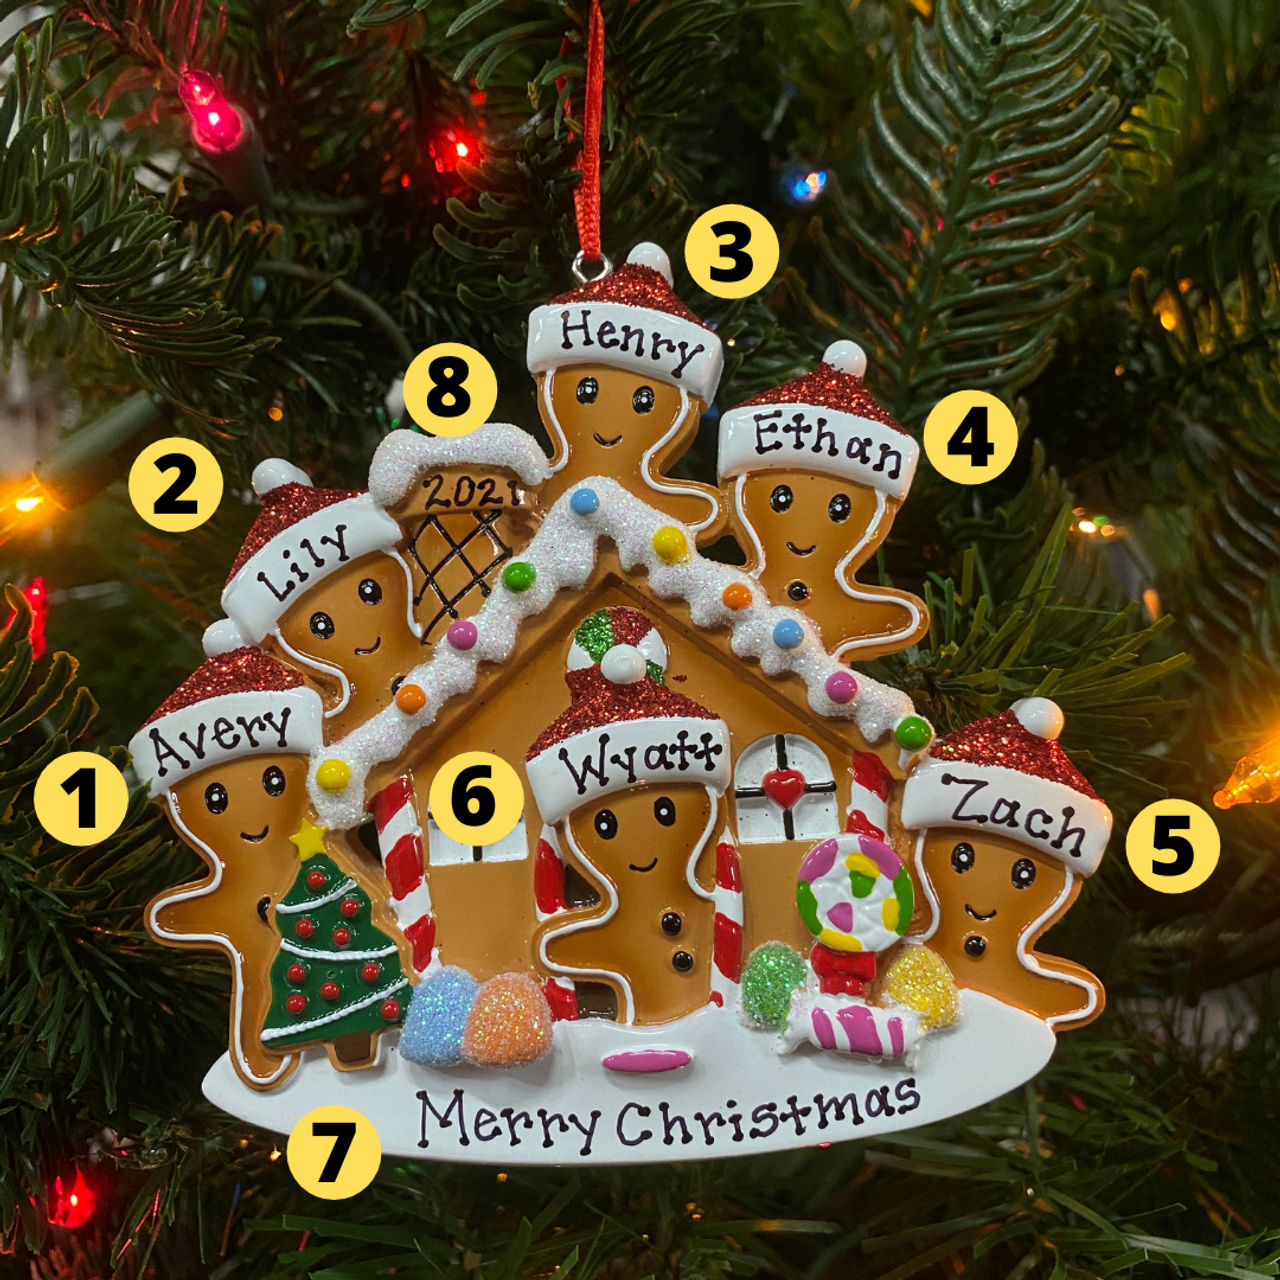 Gingerbread house personalized or non personalized Christmas ornament